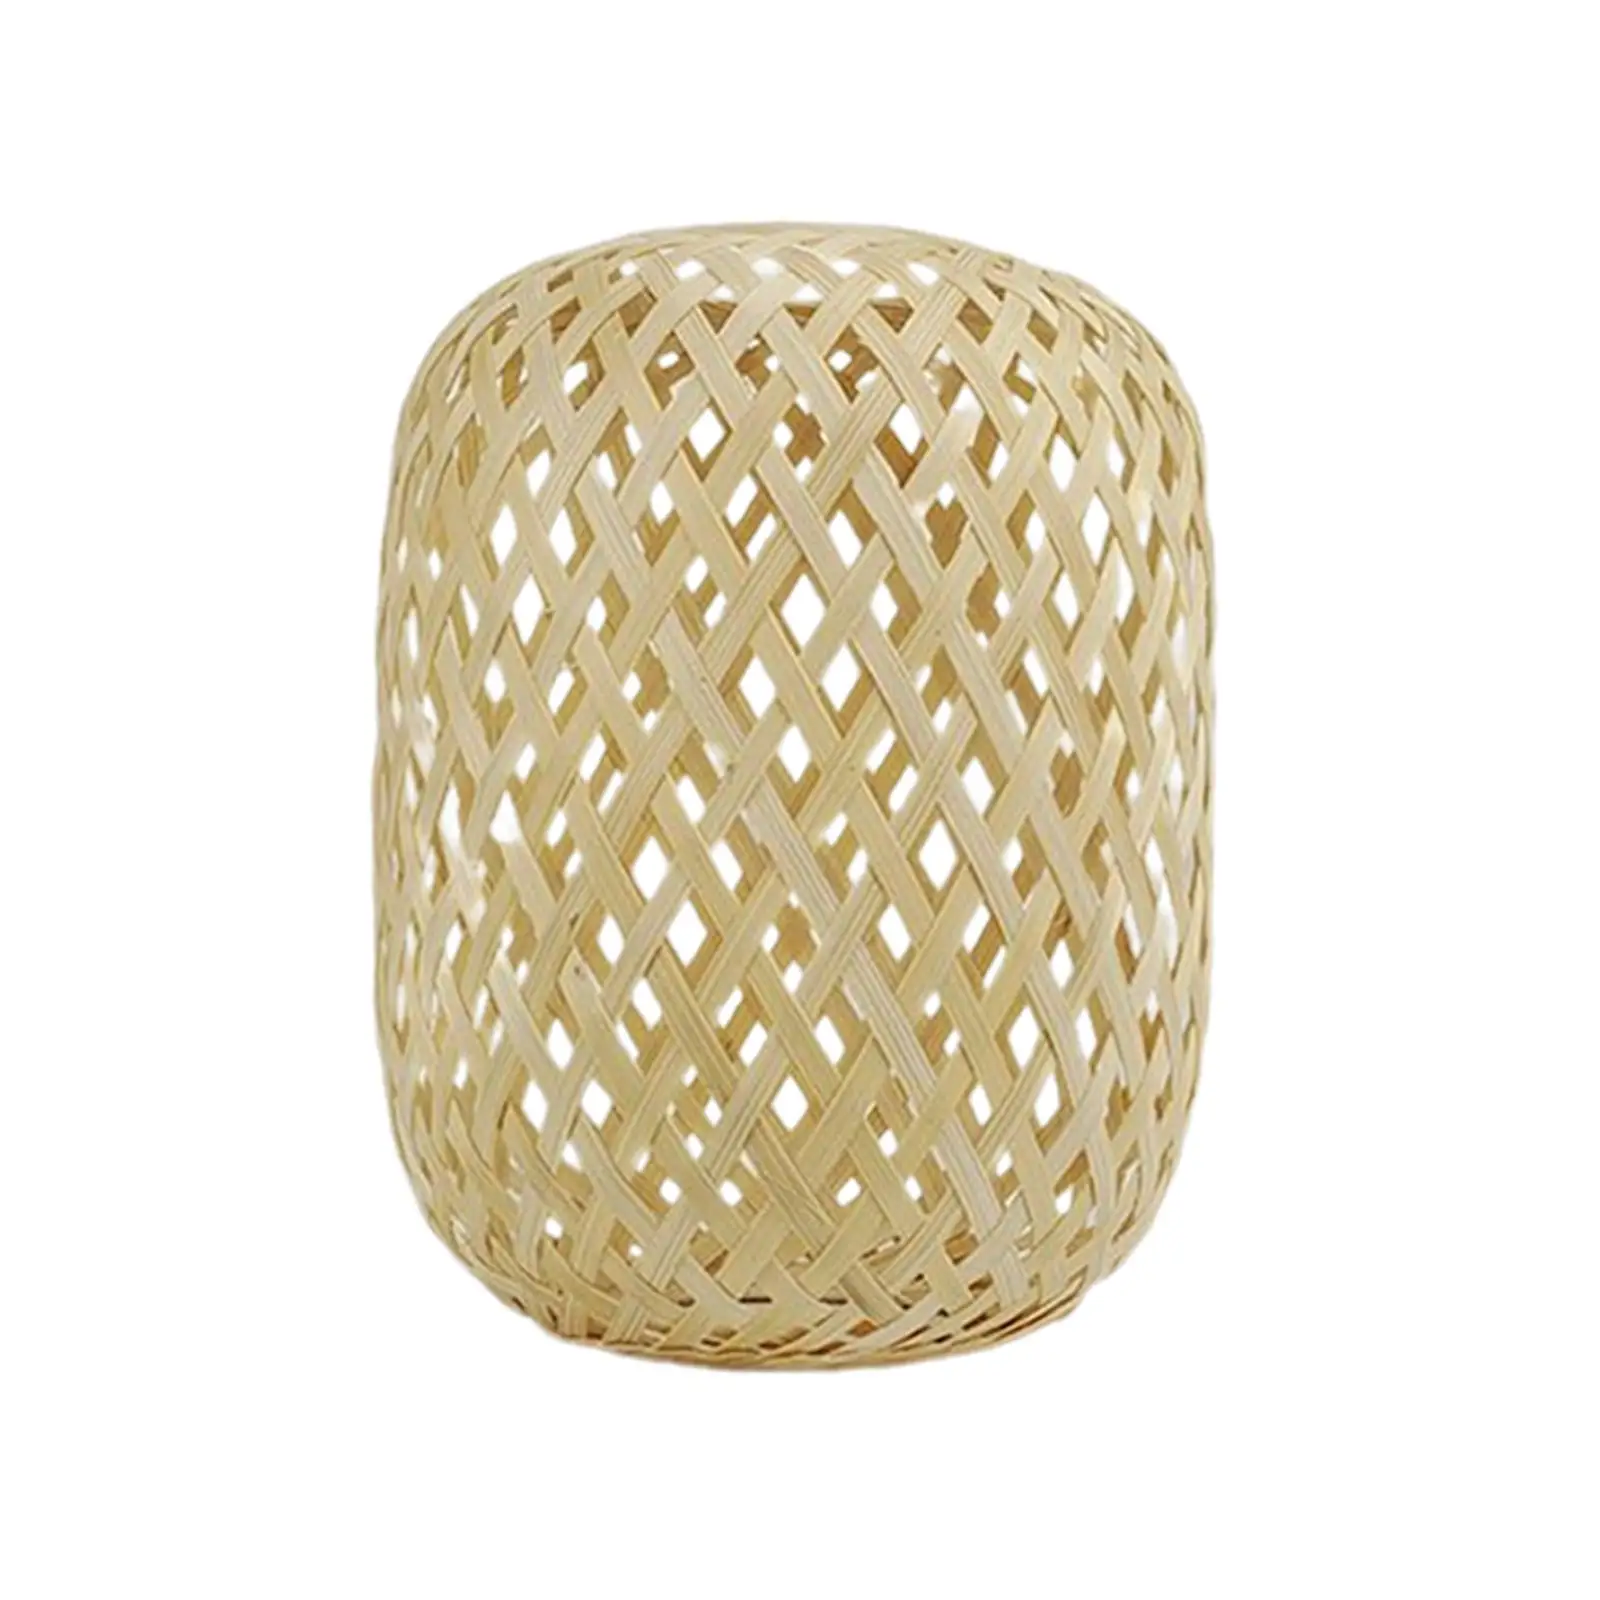 Bamboo Lampshade, Hand-Woven, Light Cover, Retro Style, Detachable, Dustproof,